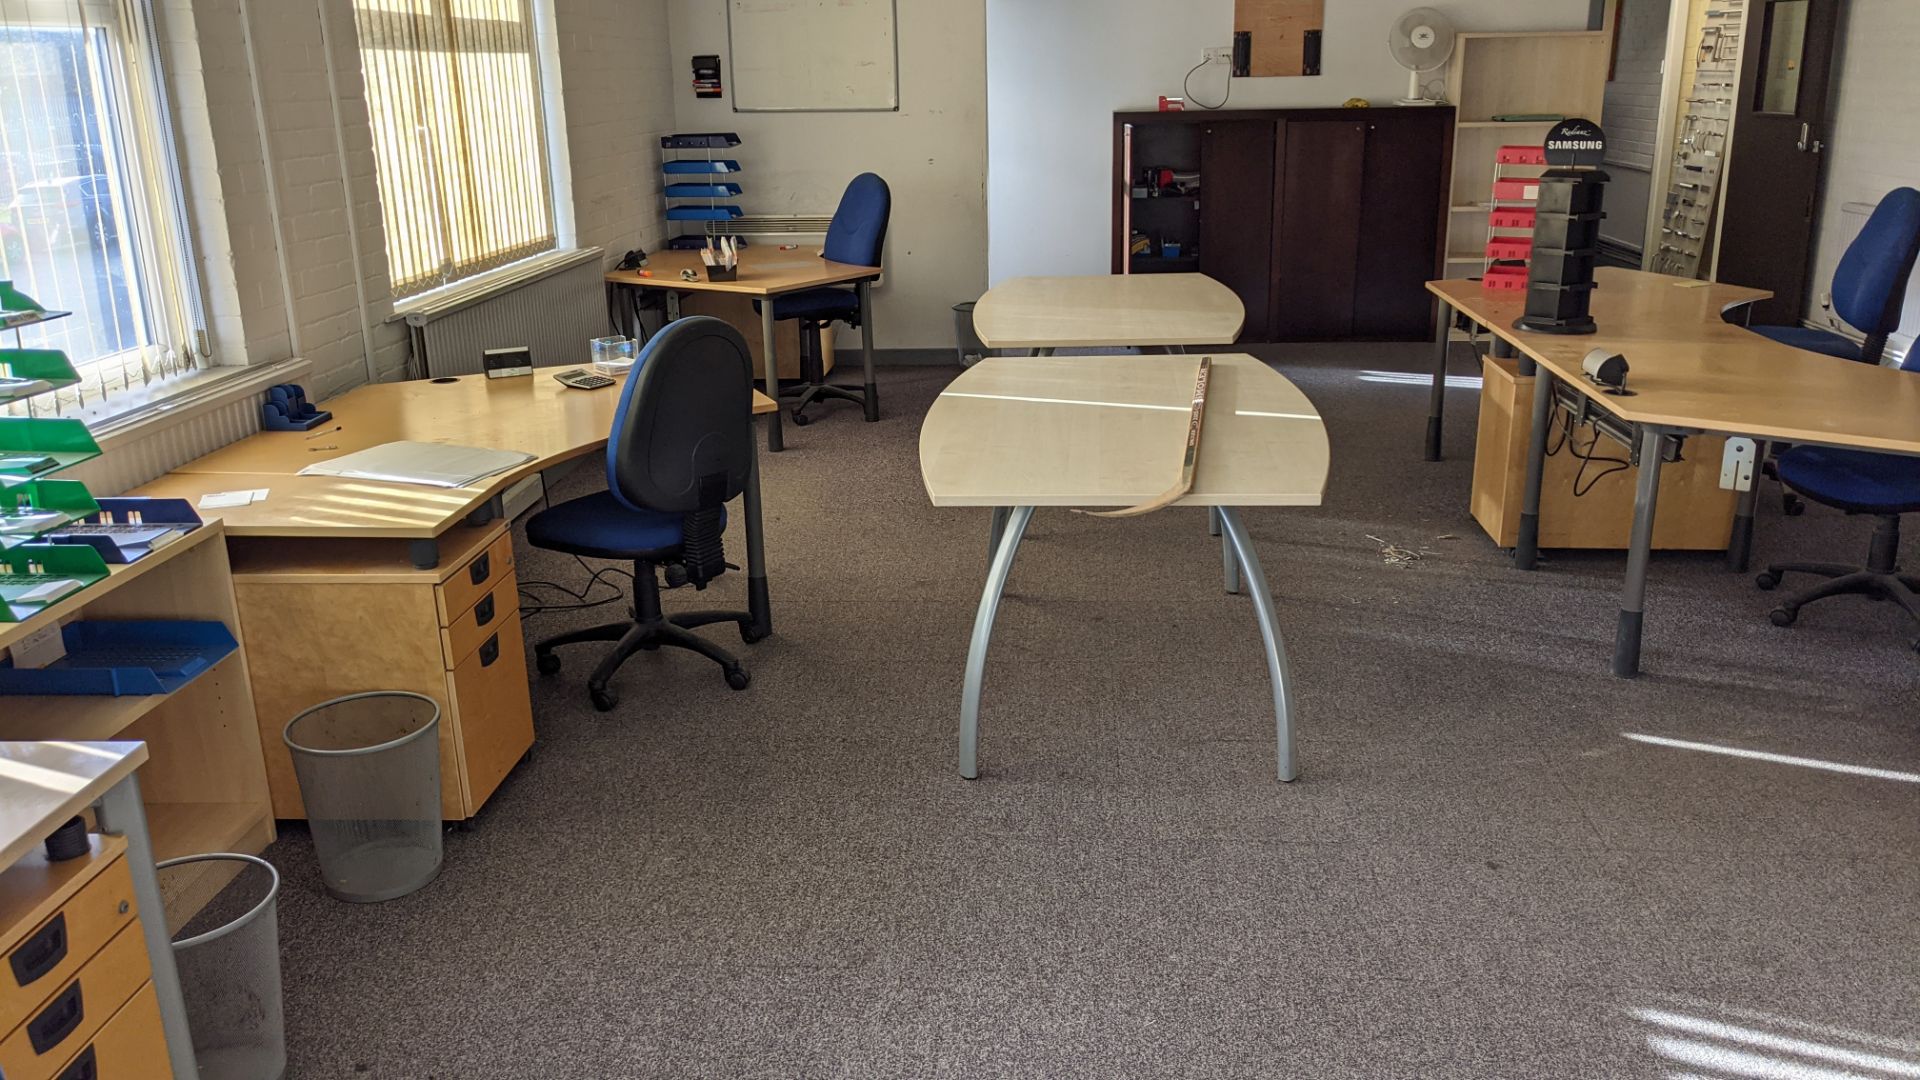 The furniture contents of a large open plan office. This lot effectively comprises all freestanding